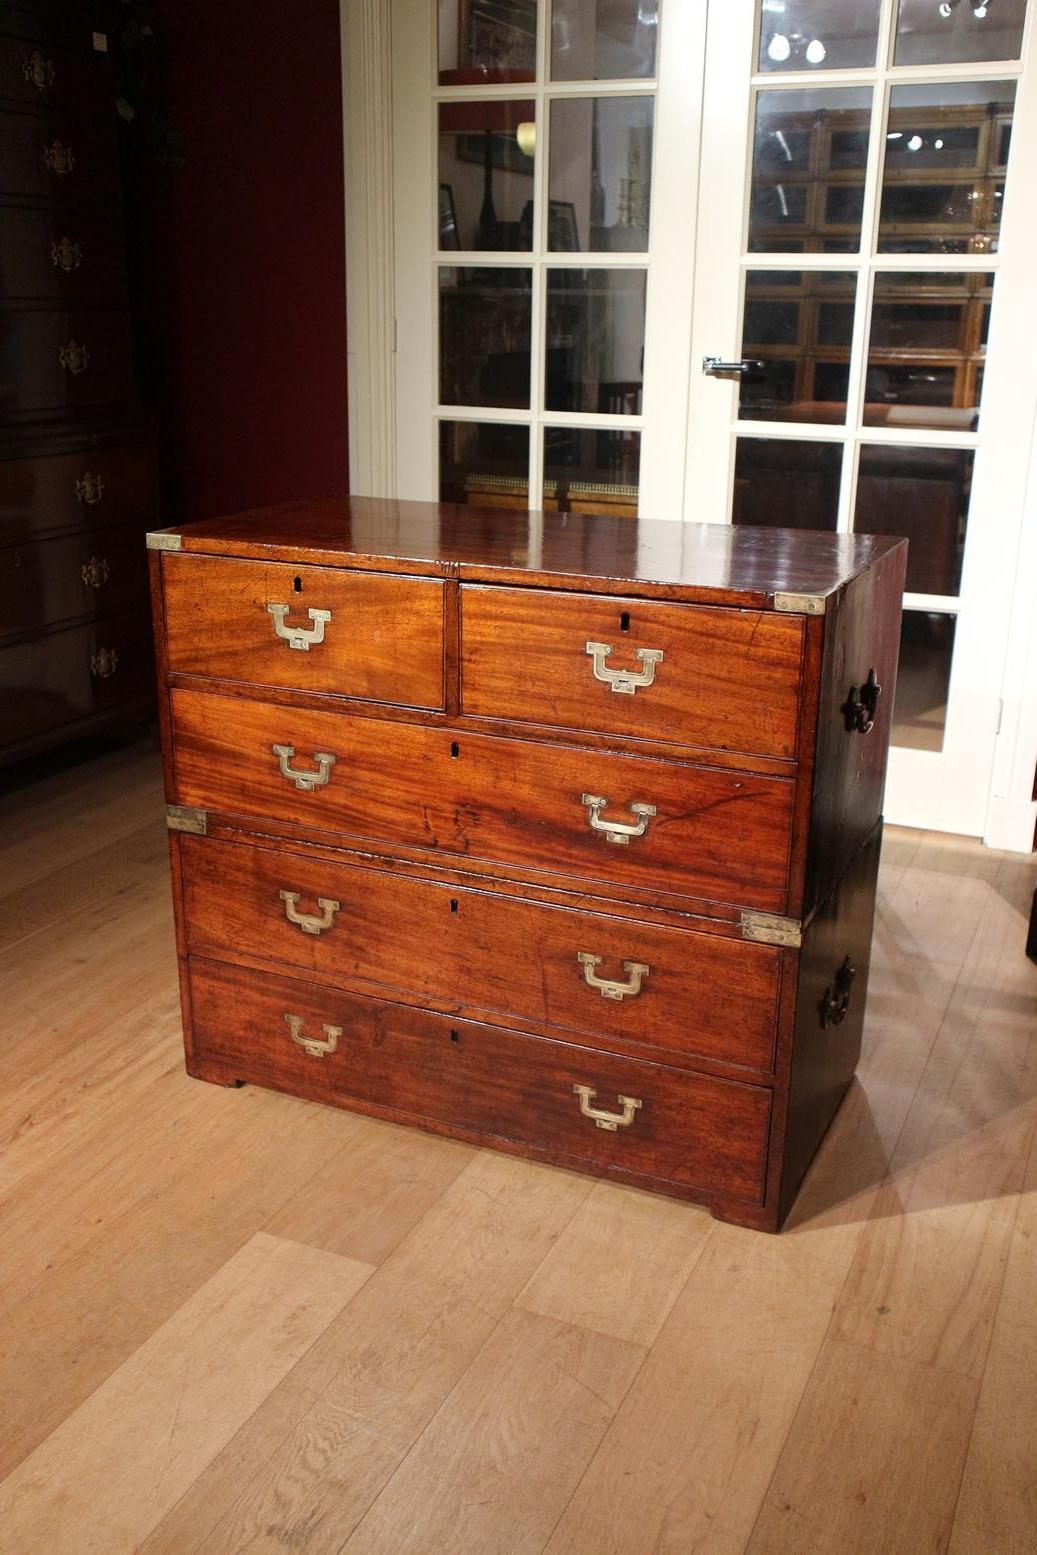 Antique mahogany campaign chest of drawers consisting of 2 parts. Beautiful warm weathered look and color. Special model drawer puller. Completely handmade with, among other things, handmade dovetail connections.
Origin: England
Period: Approx.